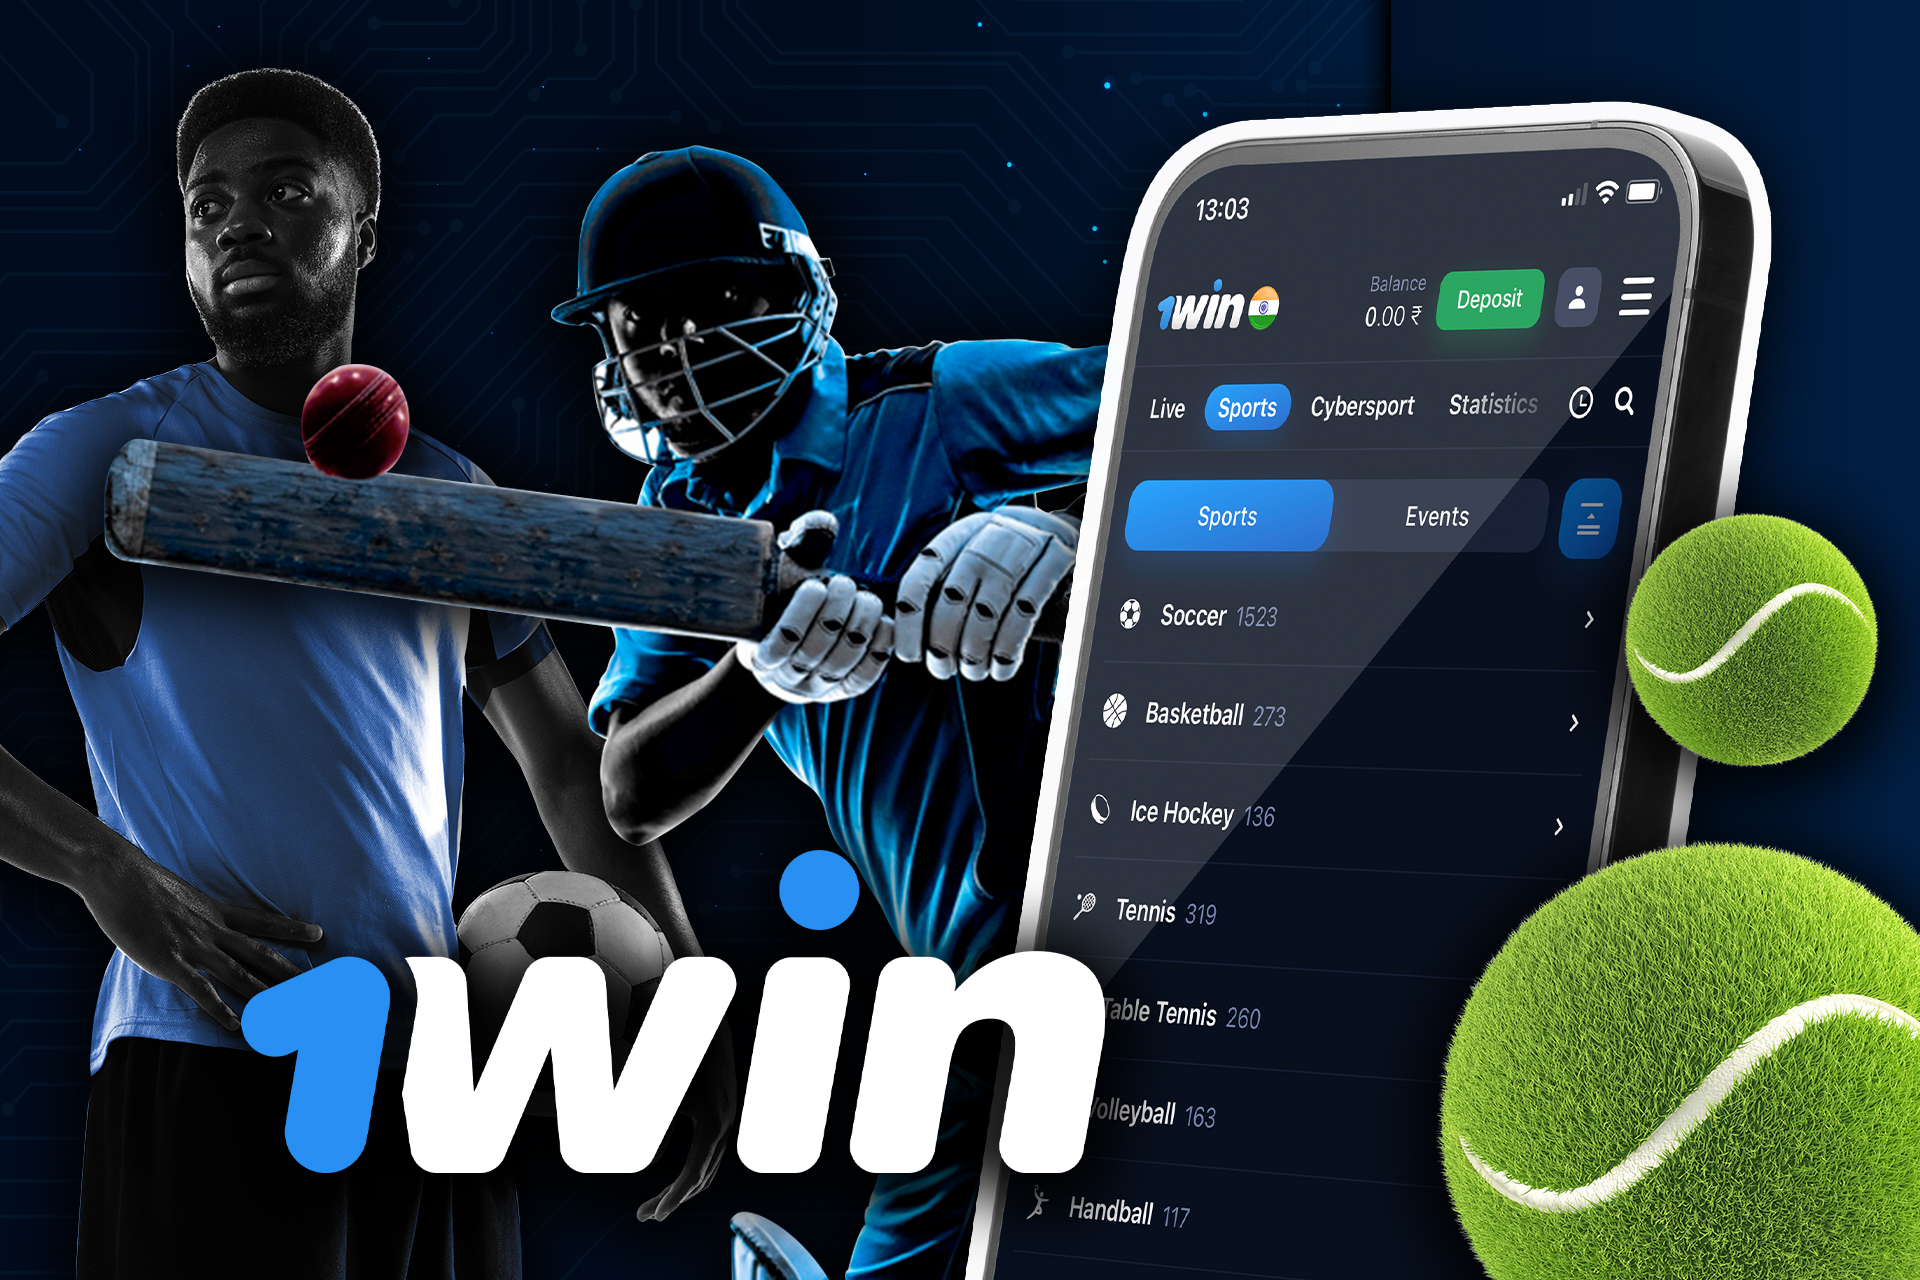 You can bet on various sports via 1win application anywhere.